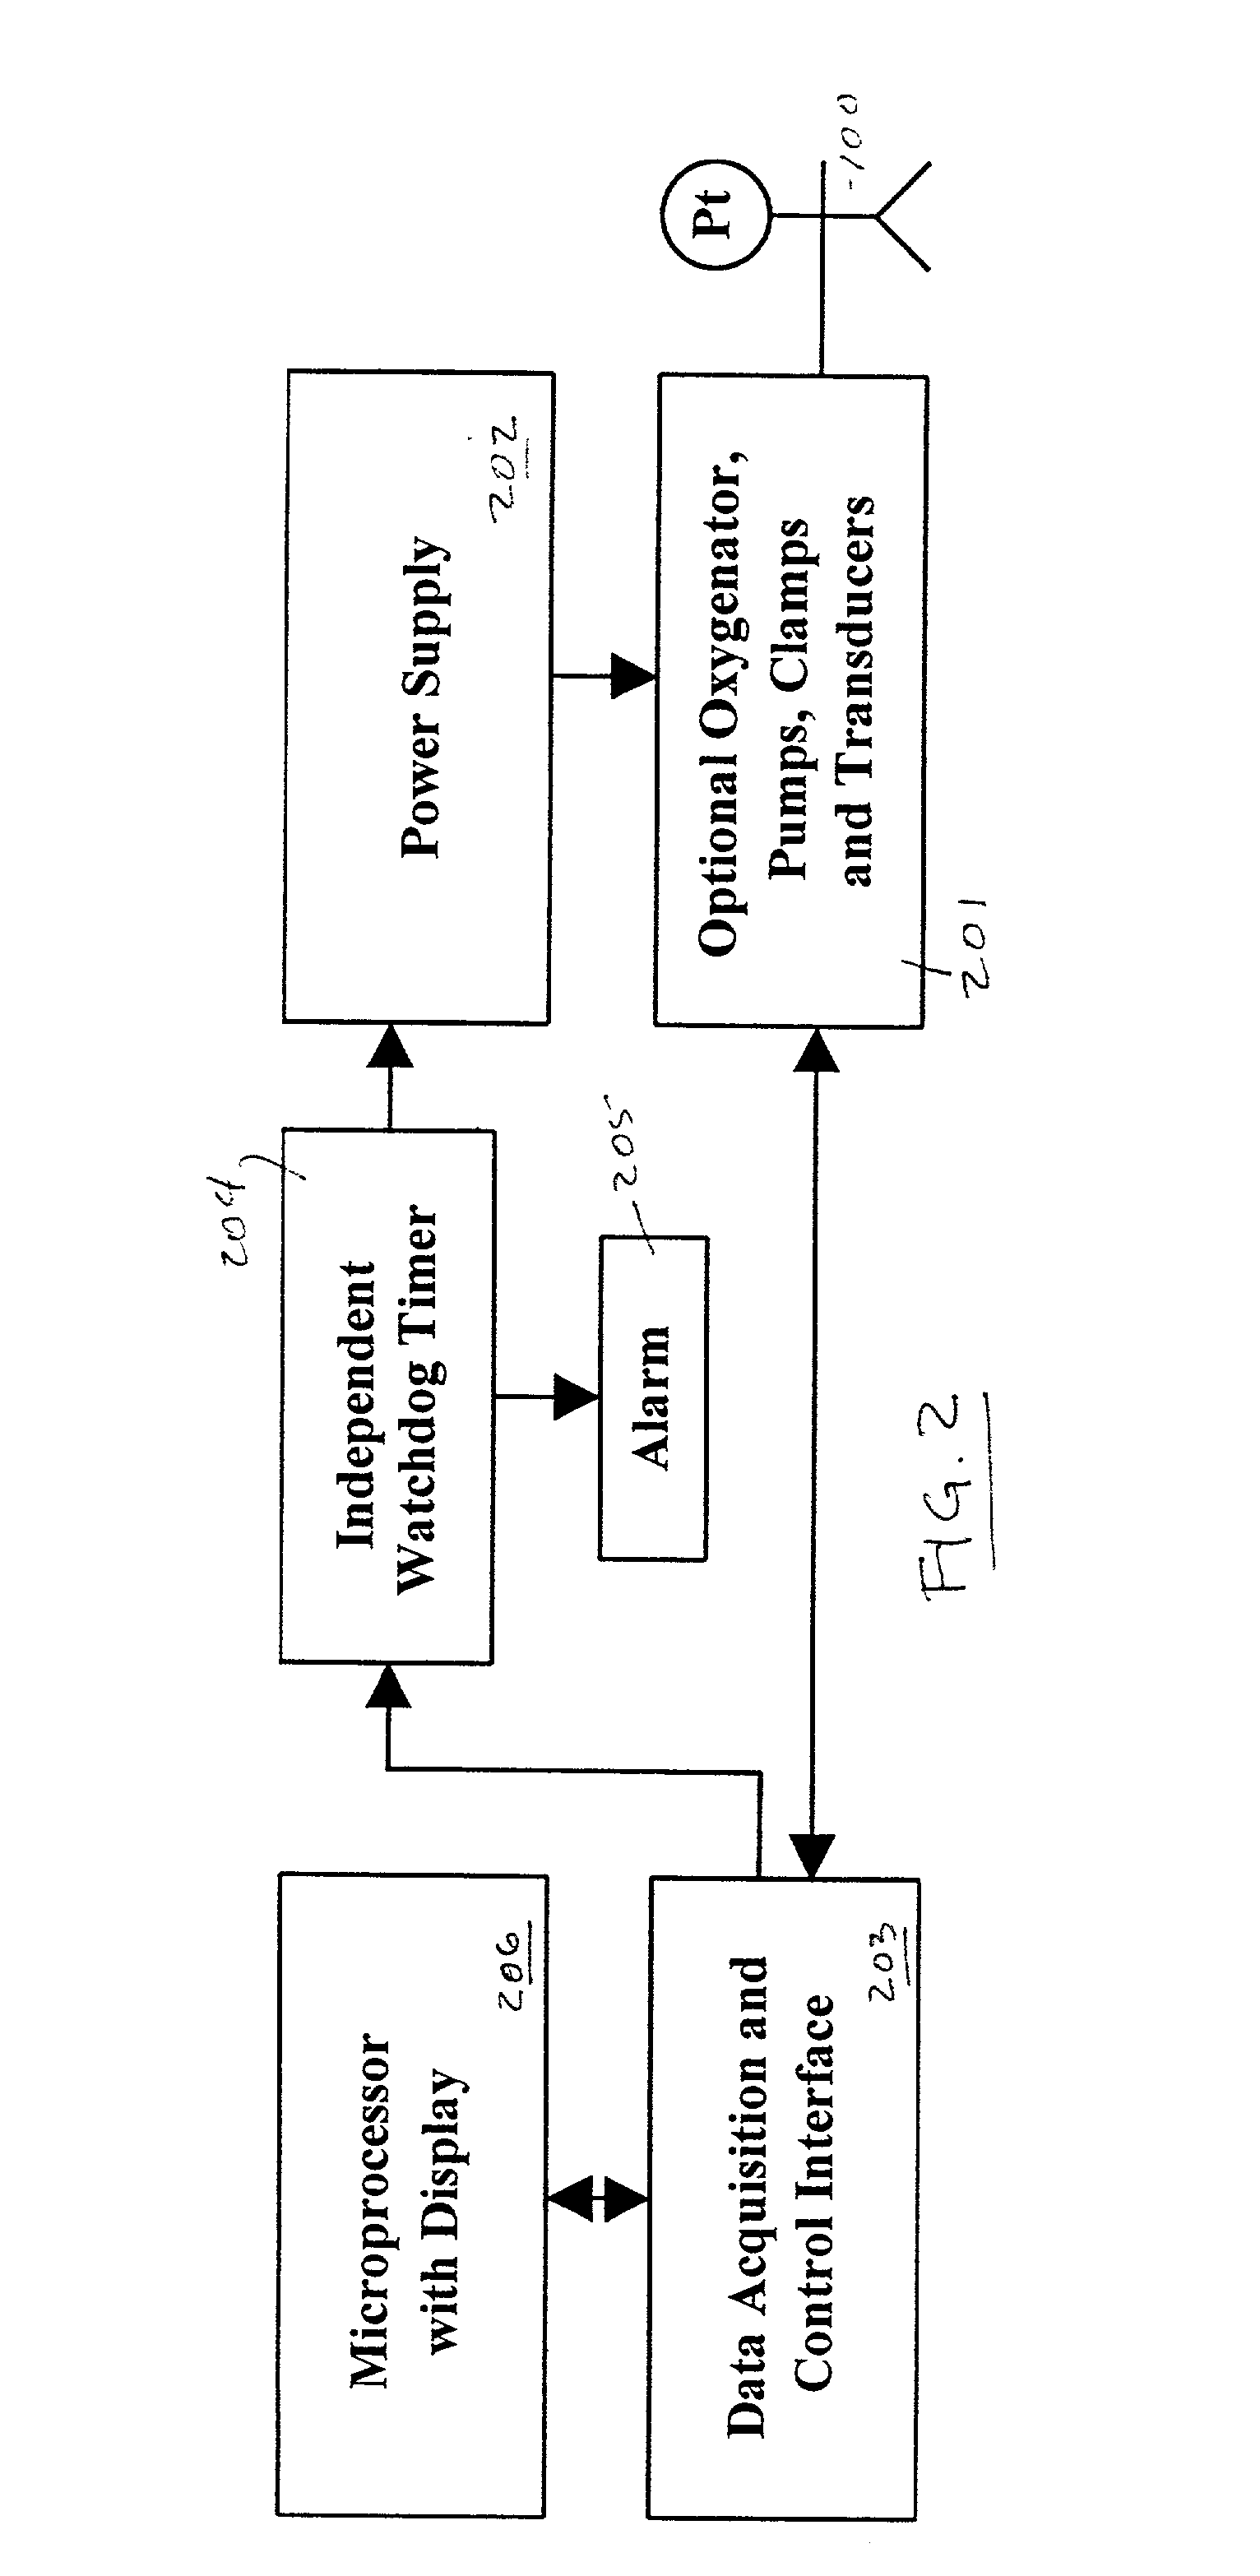 Simplified cerebral retroperfusion apparatus and method